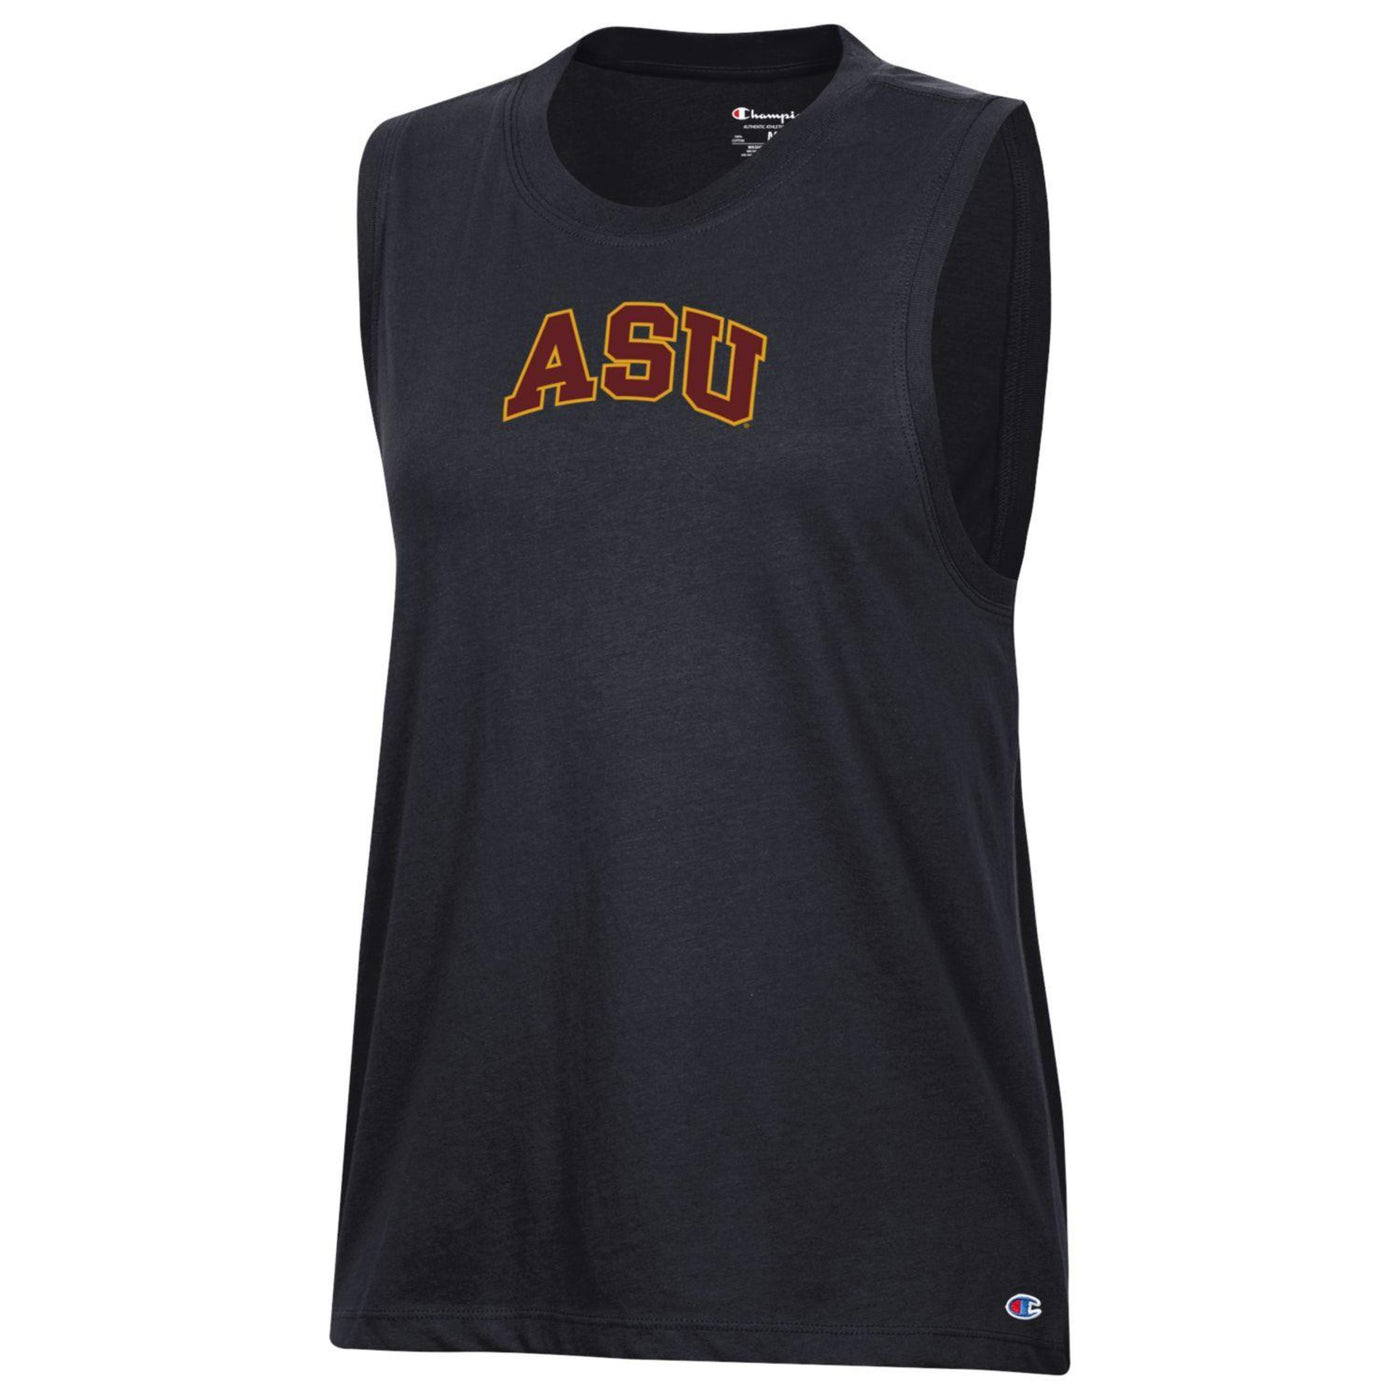 ASU black women tank top with the letters ASU written in maroon outlined in gold on the front.